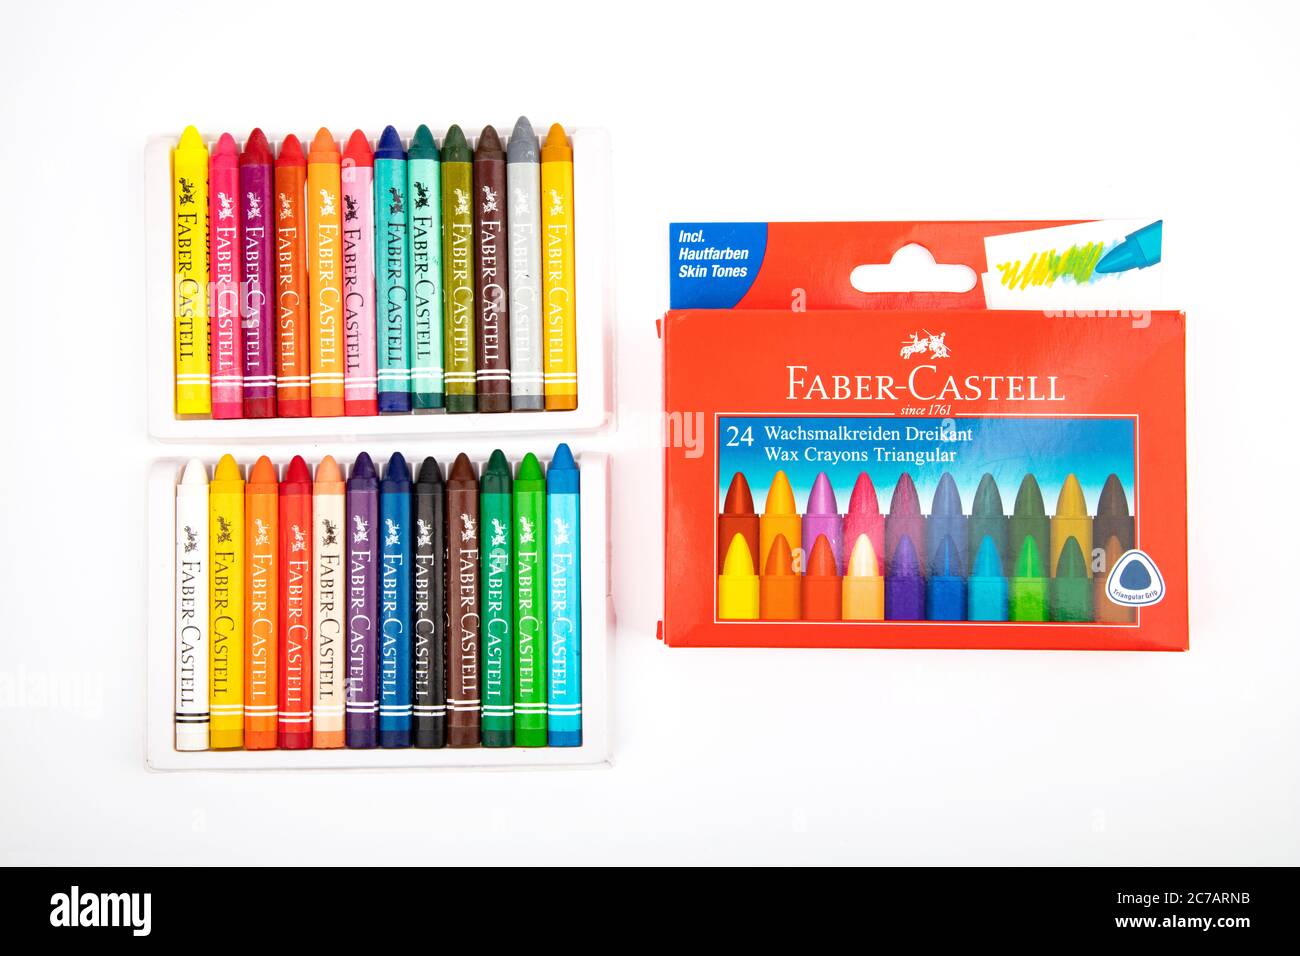 WETZLAR, GERMANY 2020 04 05 FABER CASTELL Wax Crayons. FABER CASTELL founded in 1761 in Germany. Products for writing, drawing, creative designs Stock Photo